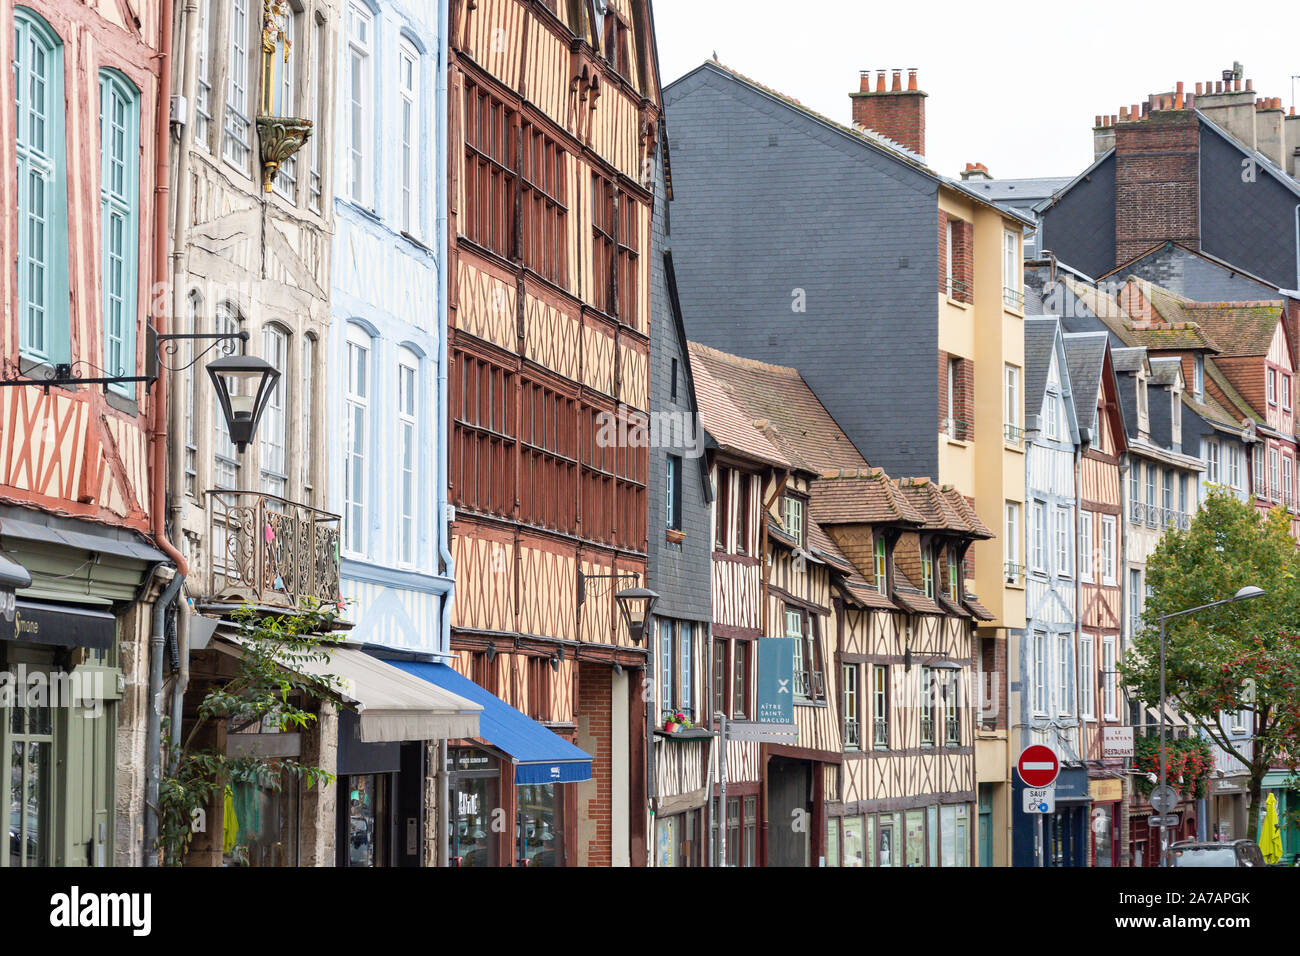 Historic timber-framed buildings, Rue Martainville, Rouen, Normandy, France Stock Photo